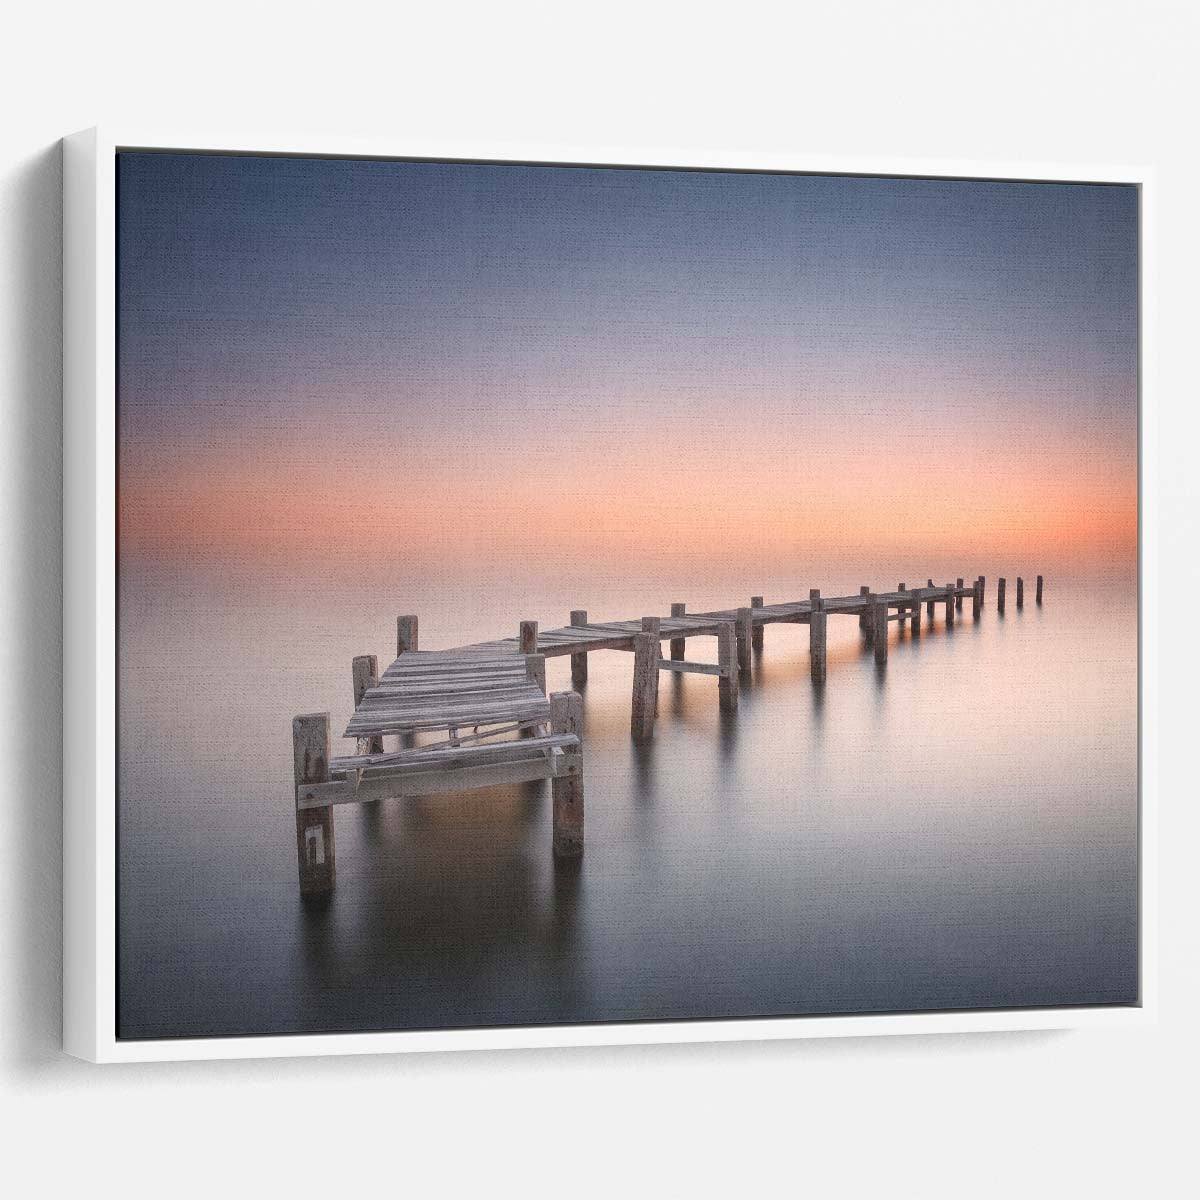 Serene Sunset Seascape Old Wooden Pier Wall Art by Luxuriance Designs. Made in USA.